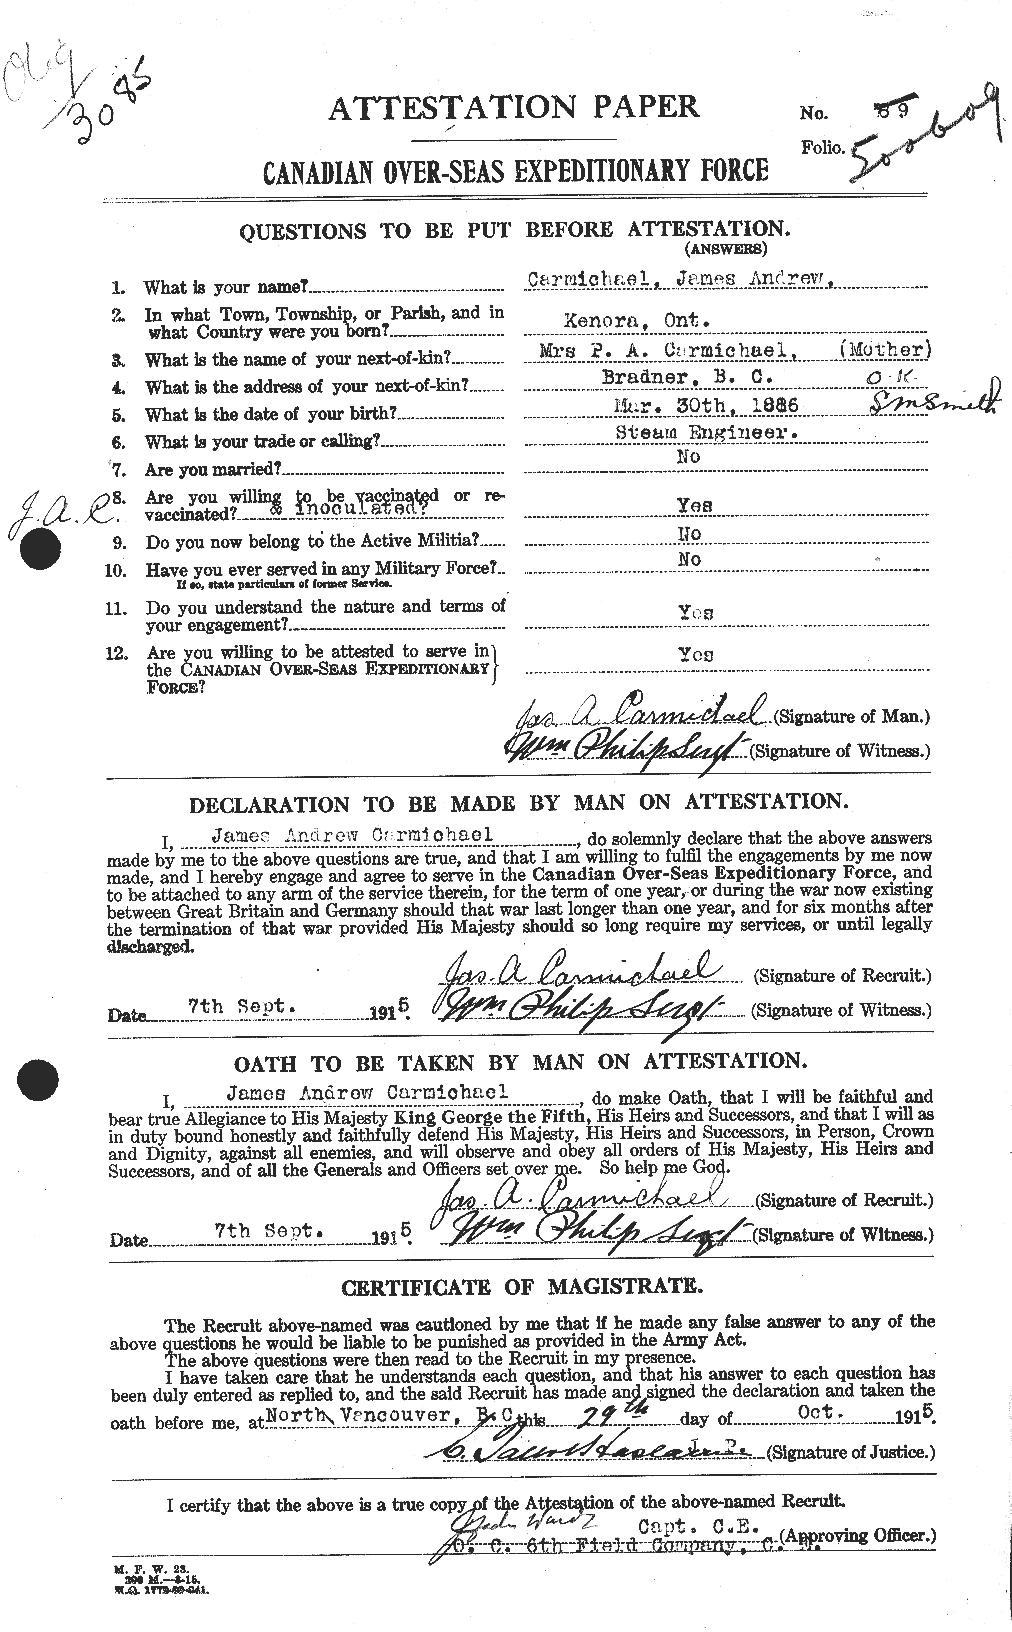 Personnel Records of the First World War - CEF 004631a